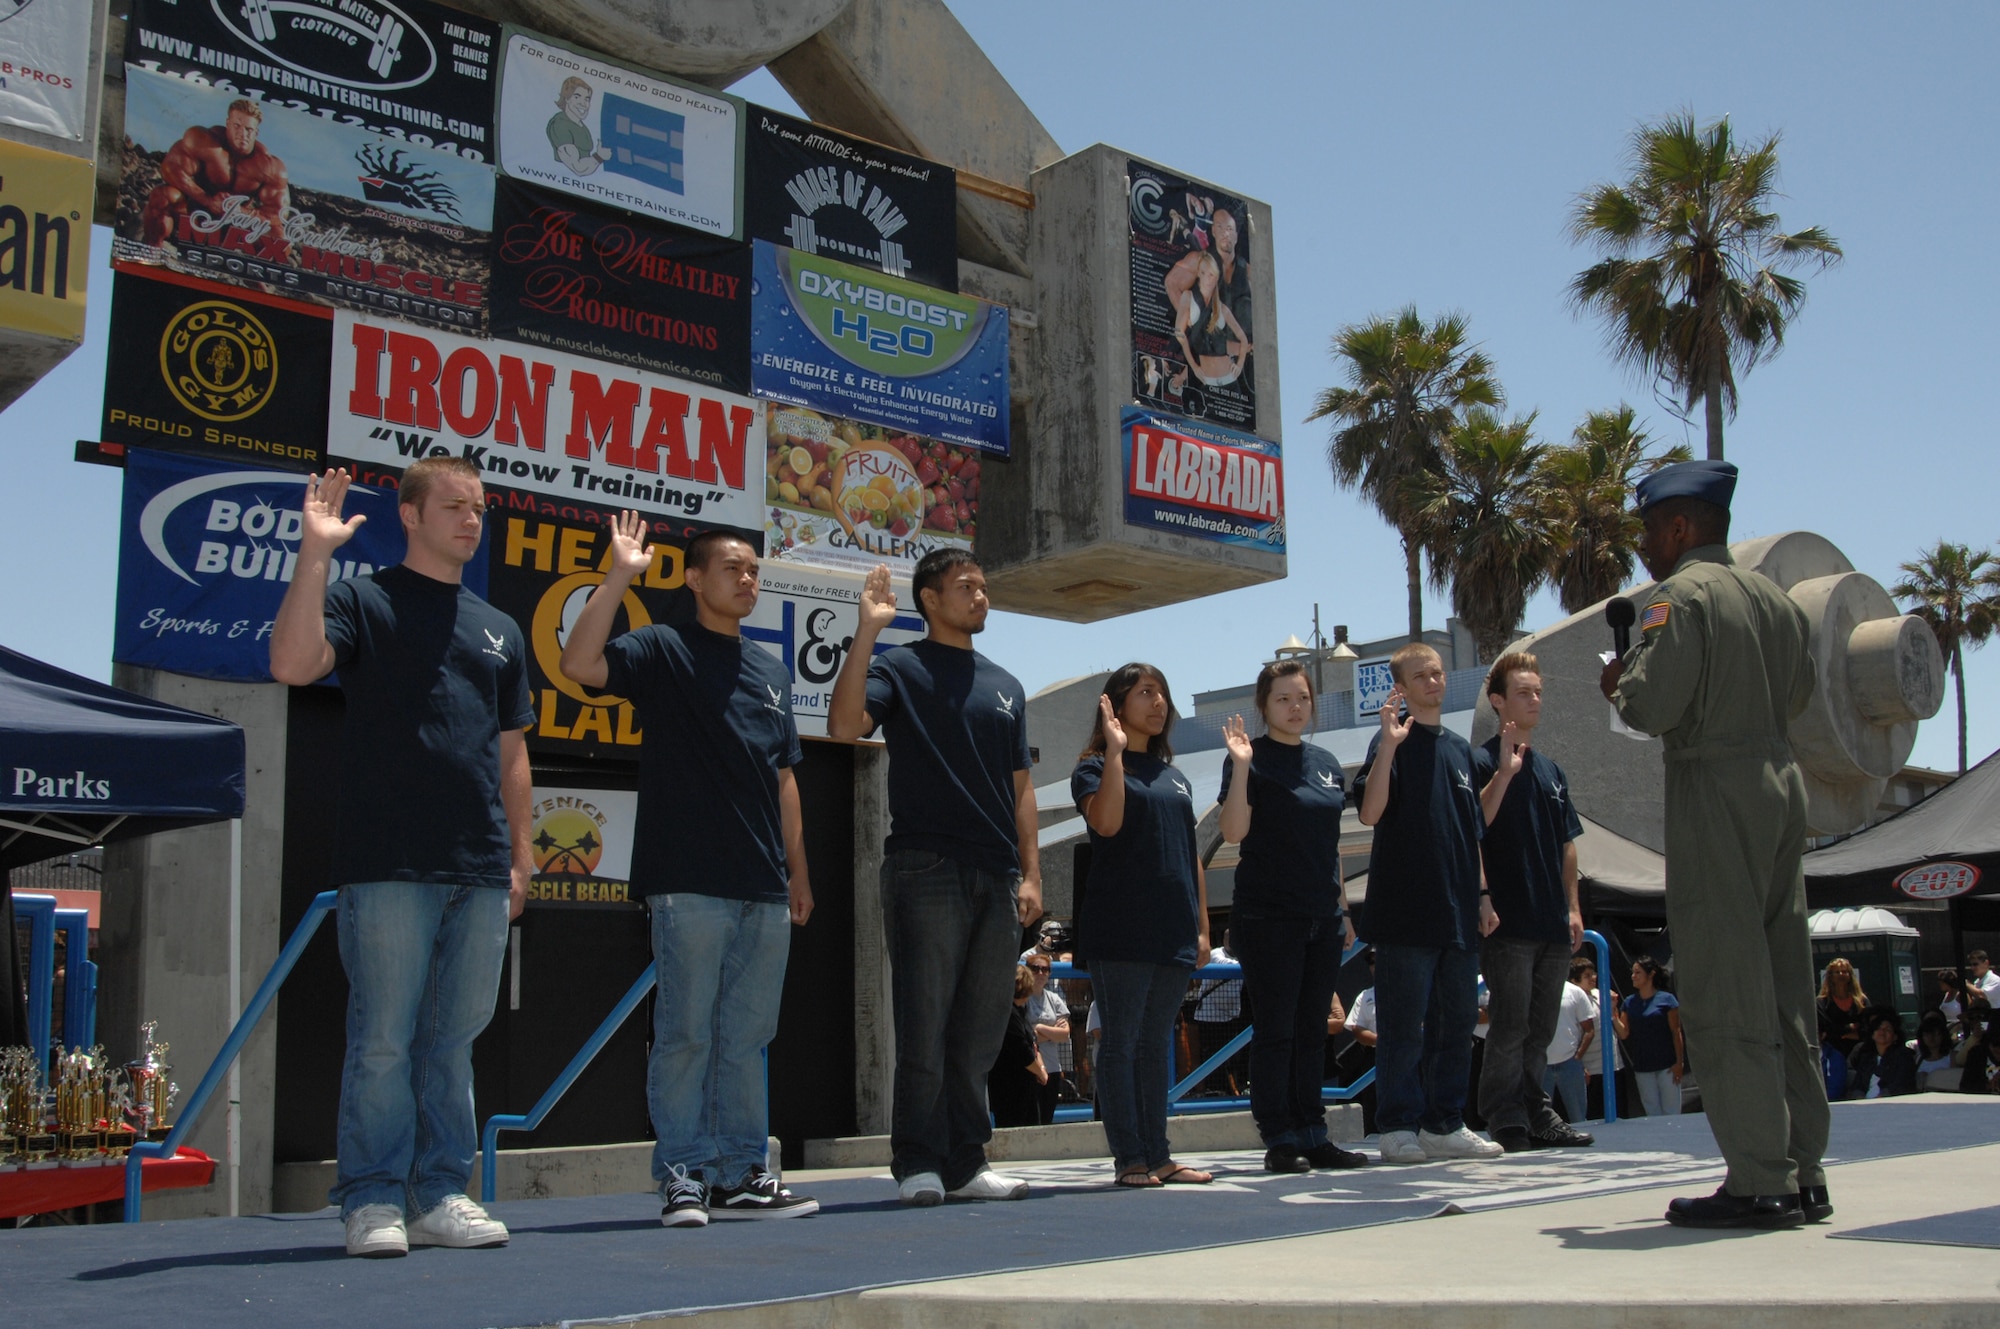 Seven Delayed Entry Program Recruits entering the Air Force receive the oath of office from Col. Kenneth Allison, chief of the concept development division at the Muscle Beach International Classic, May 26.  The recruits from left to right are:  Michael Edwards, Thai Thach, Andelson Tocong, Vivian Ortiz, Jennifer Kuehn, Thomas Arzola, and Chris Webb. (Photo by Lou Hernandez) 